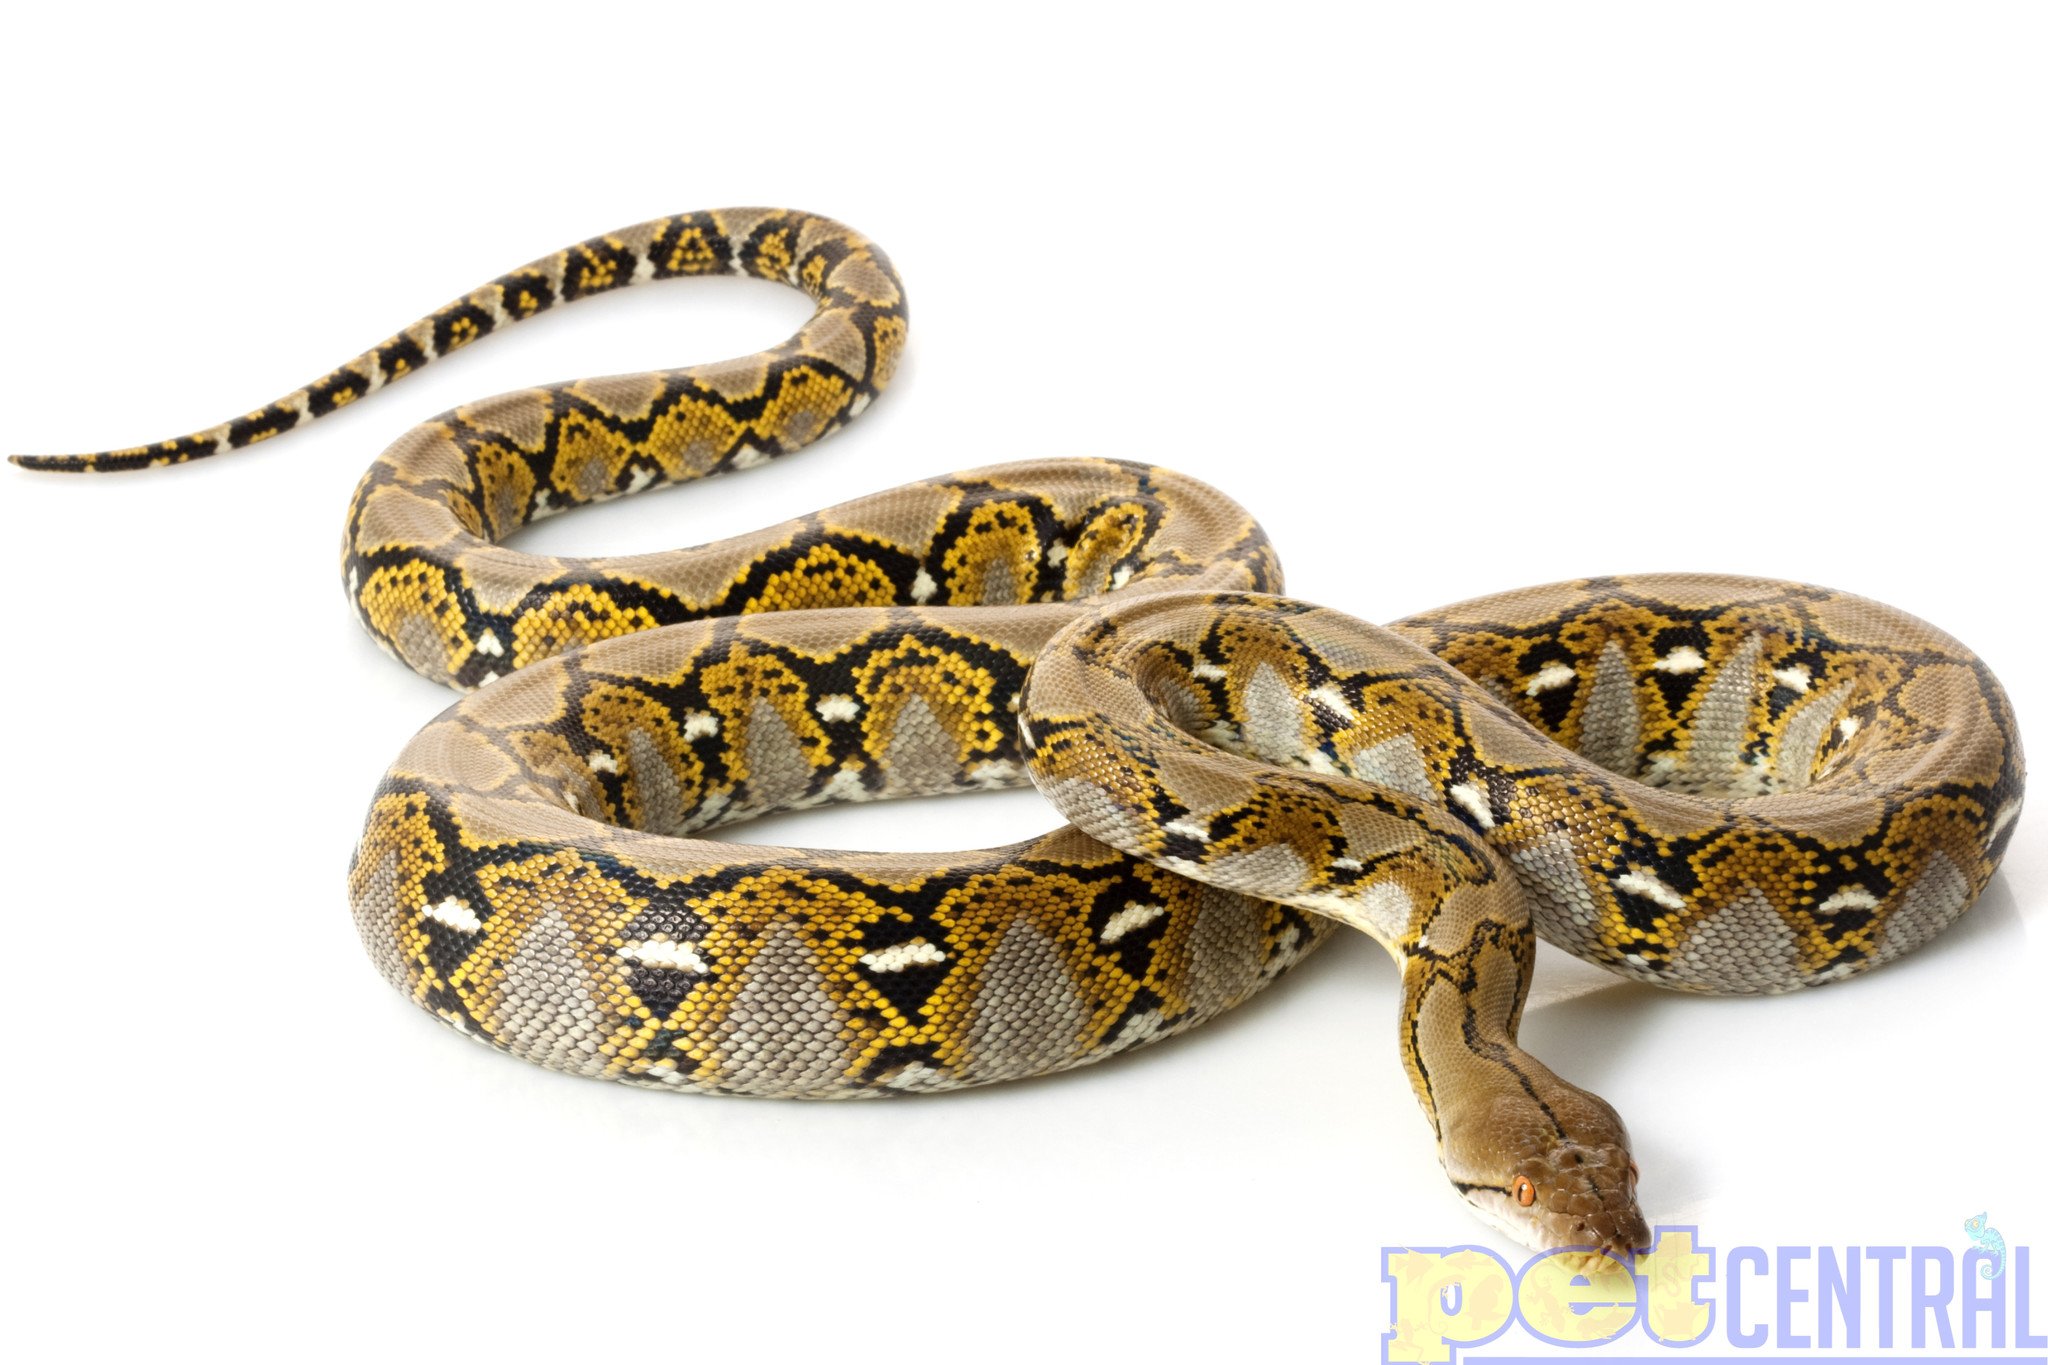 Reticulated & Other Pythons